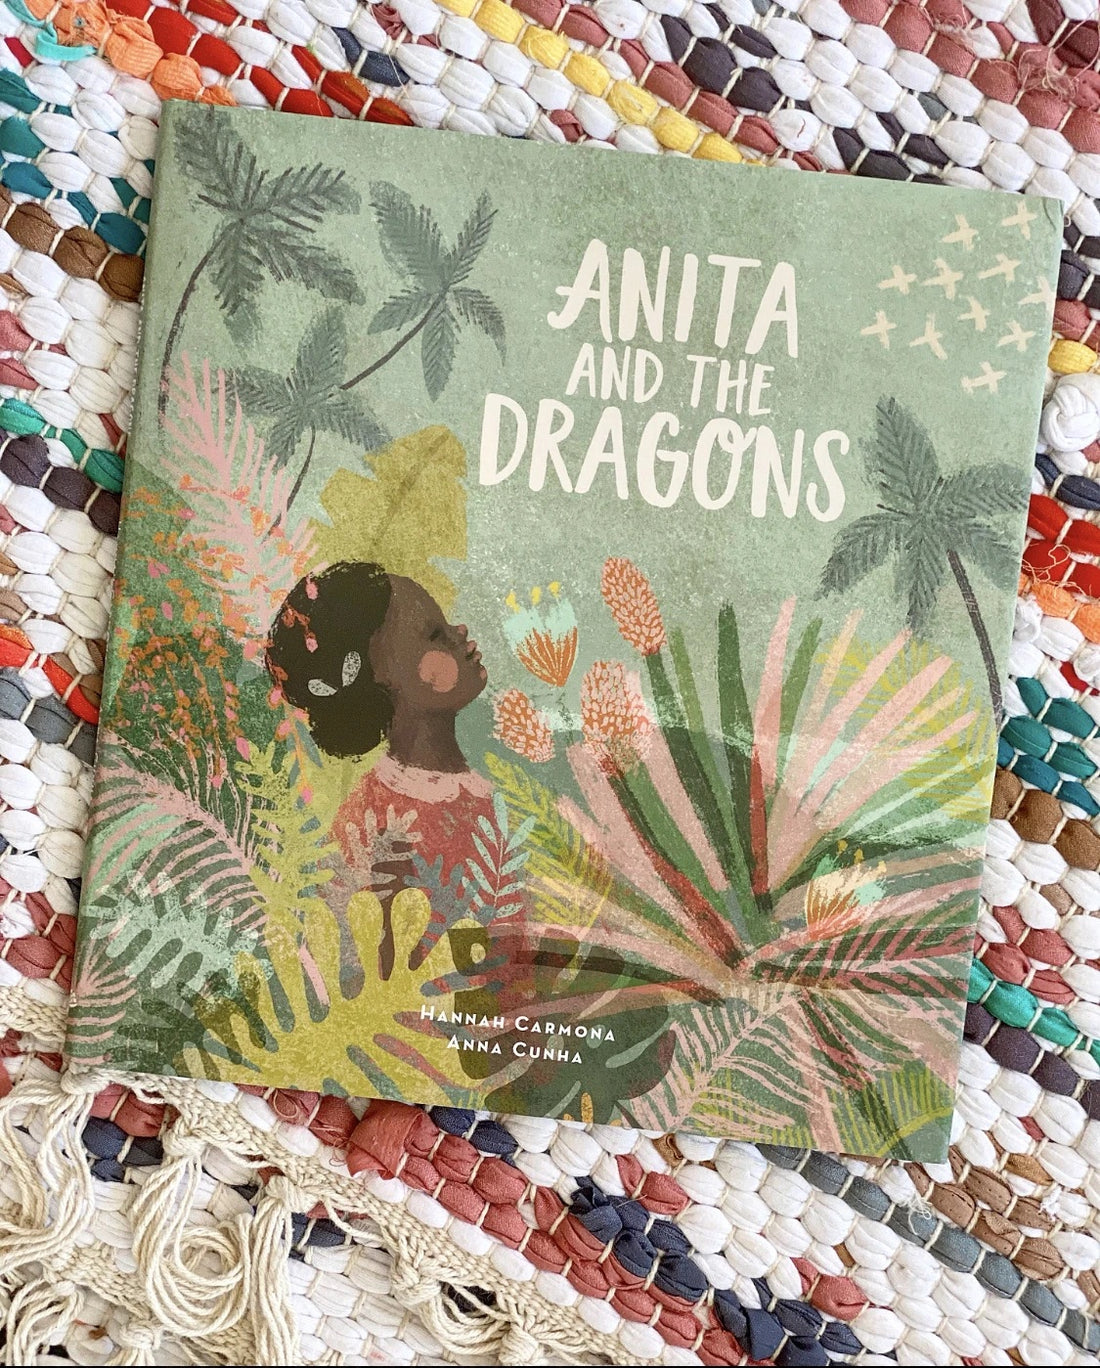 New Collection, Lantana diverse and inclusive children’s books